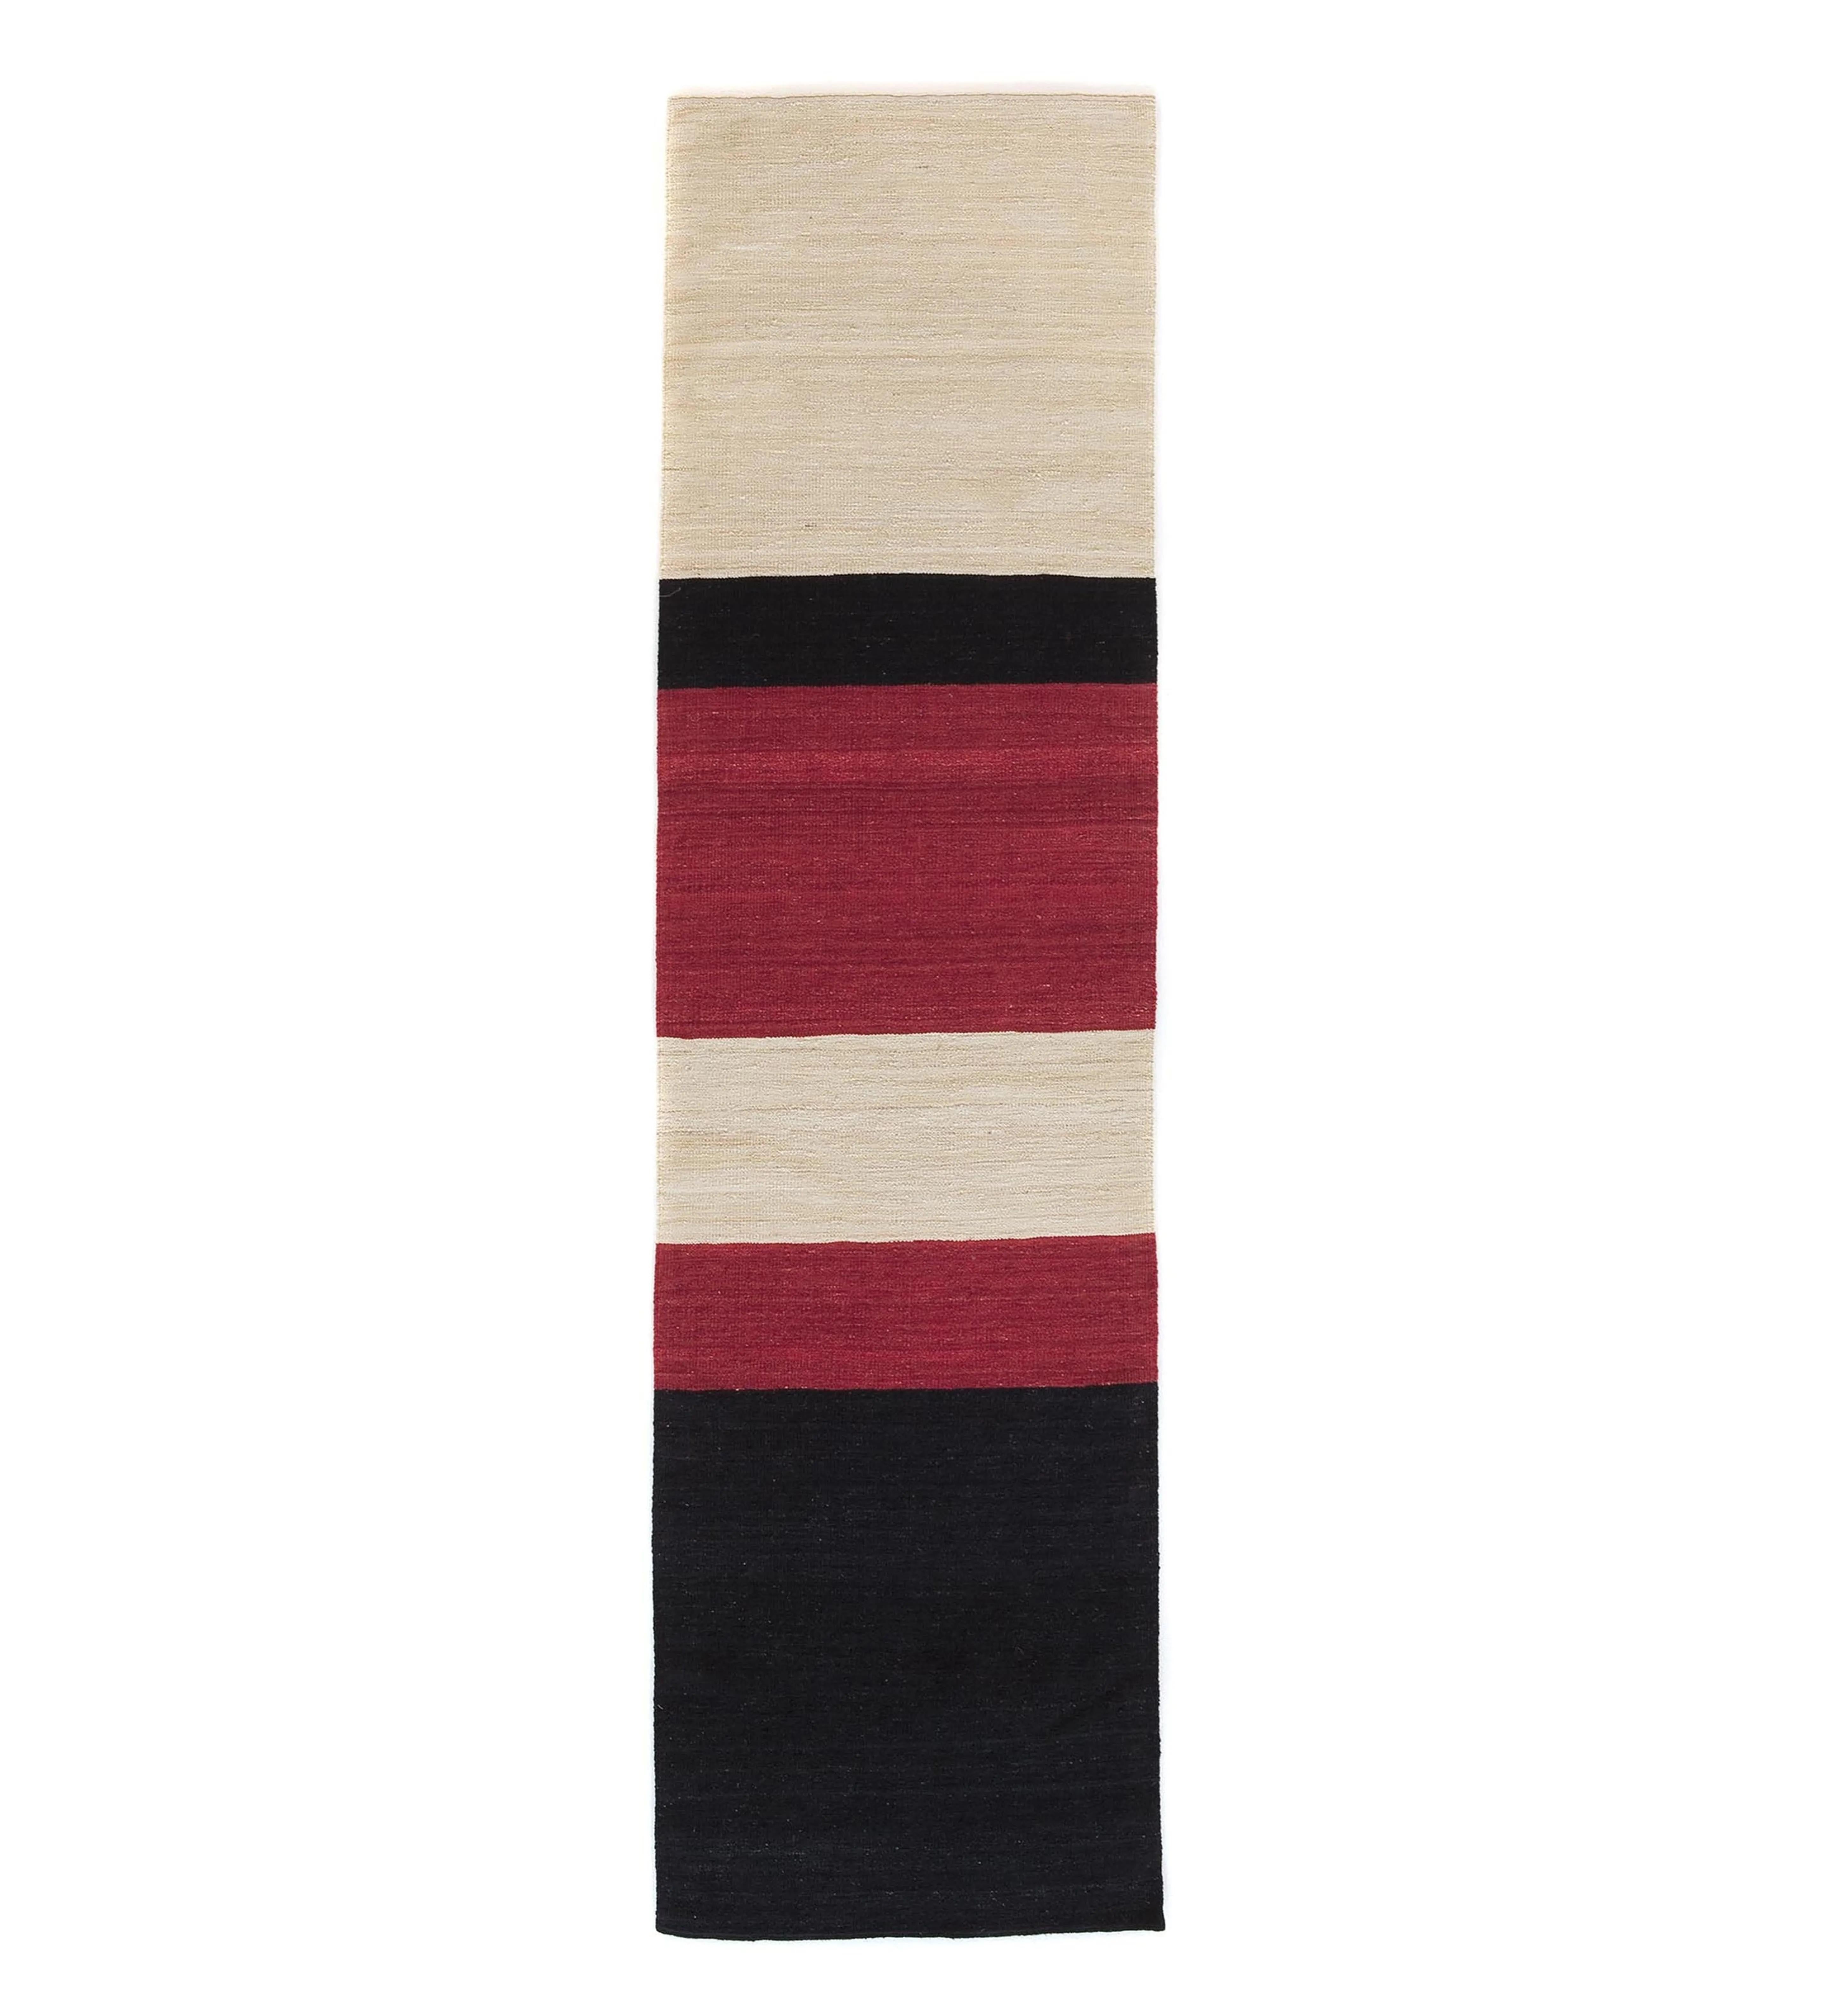 'Mélange Color 1' Hand-Loomed Rug by Sybilla for Nanimarquina For Sale 2